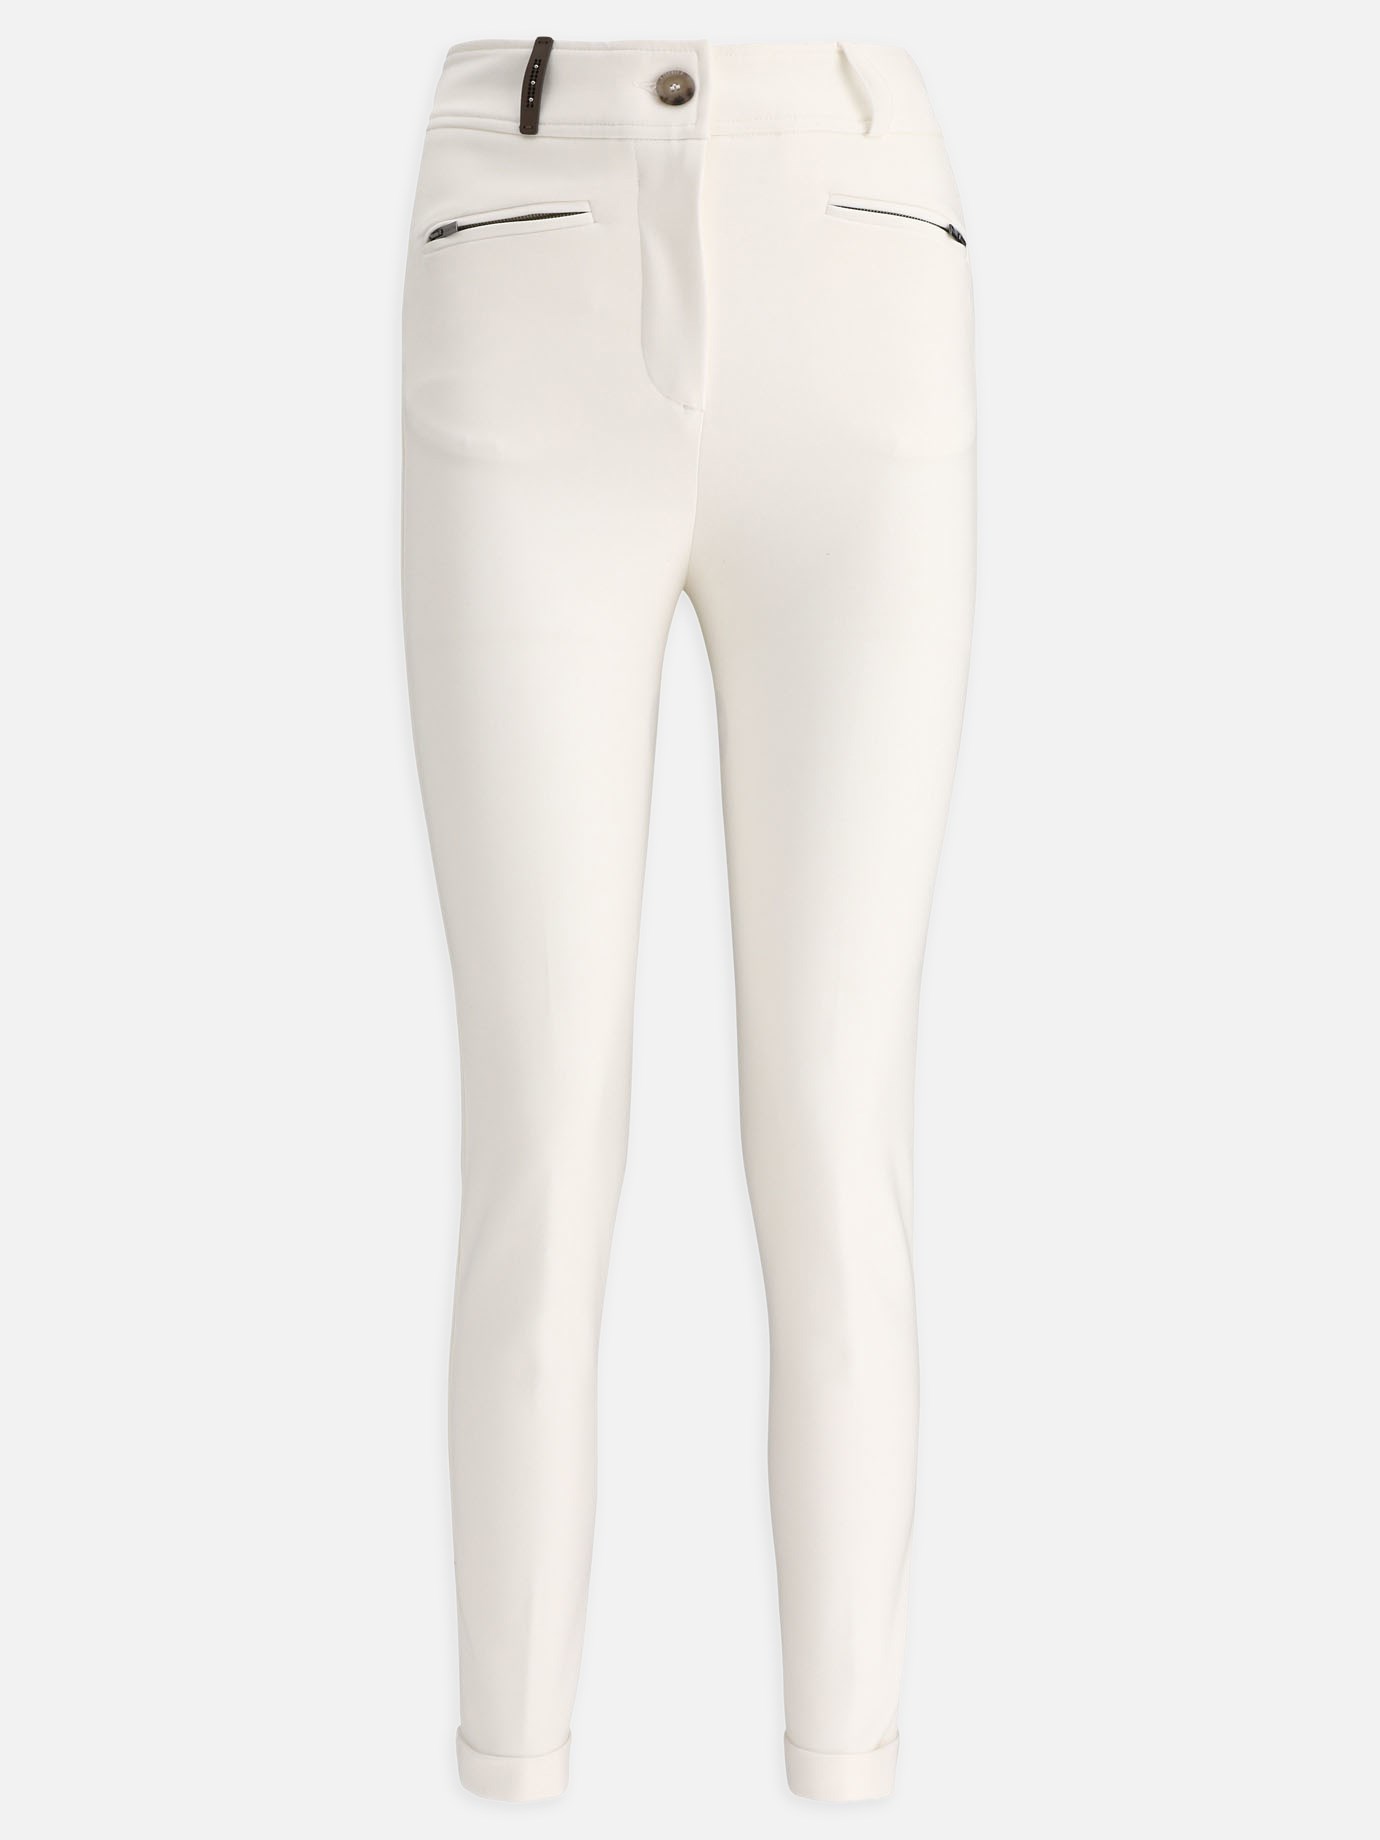 Trousers featuring zipped pocketsby Peserico - 2